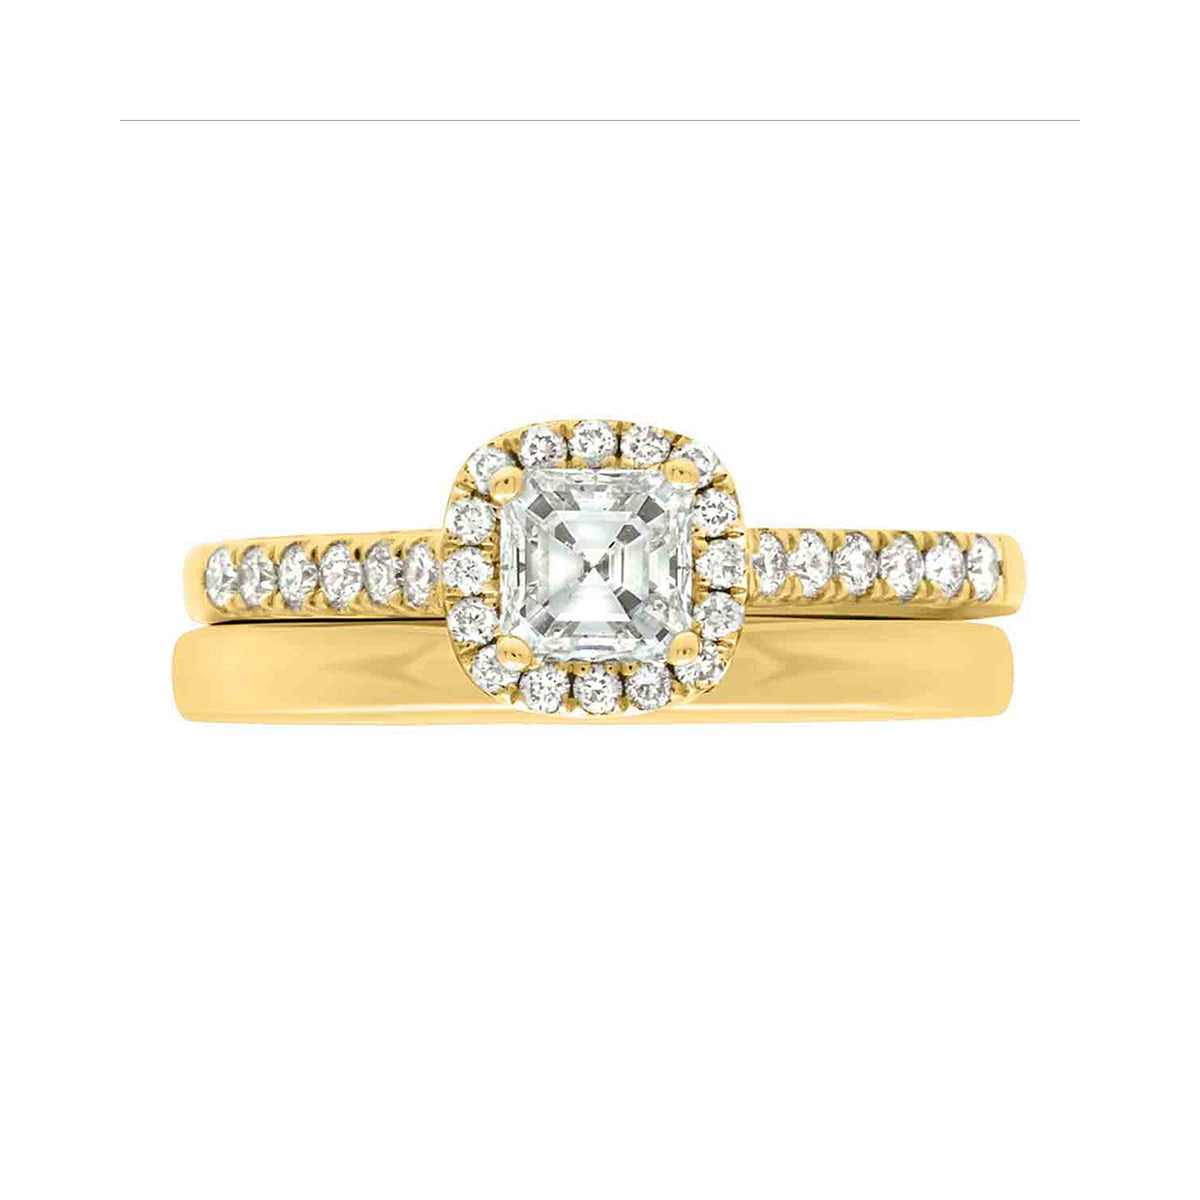 Asscher Halo Diamond Ring in yellow gold with a yellow gold wedding band